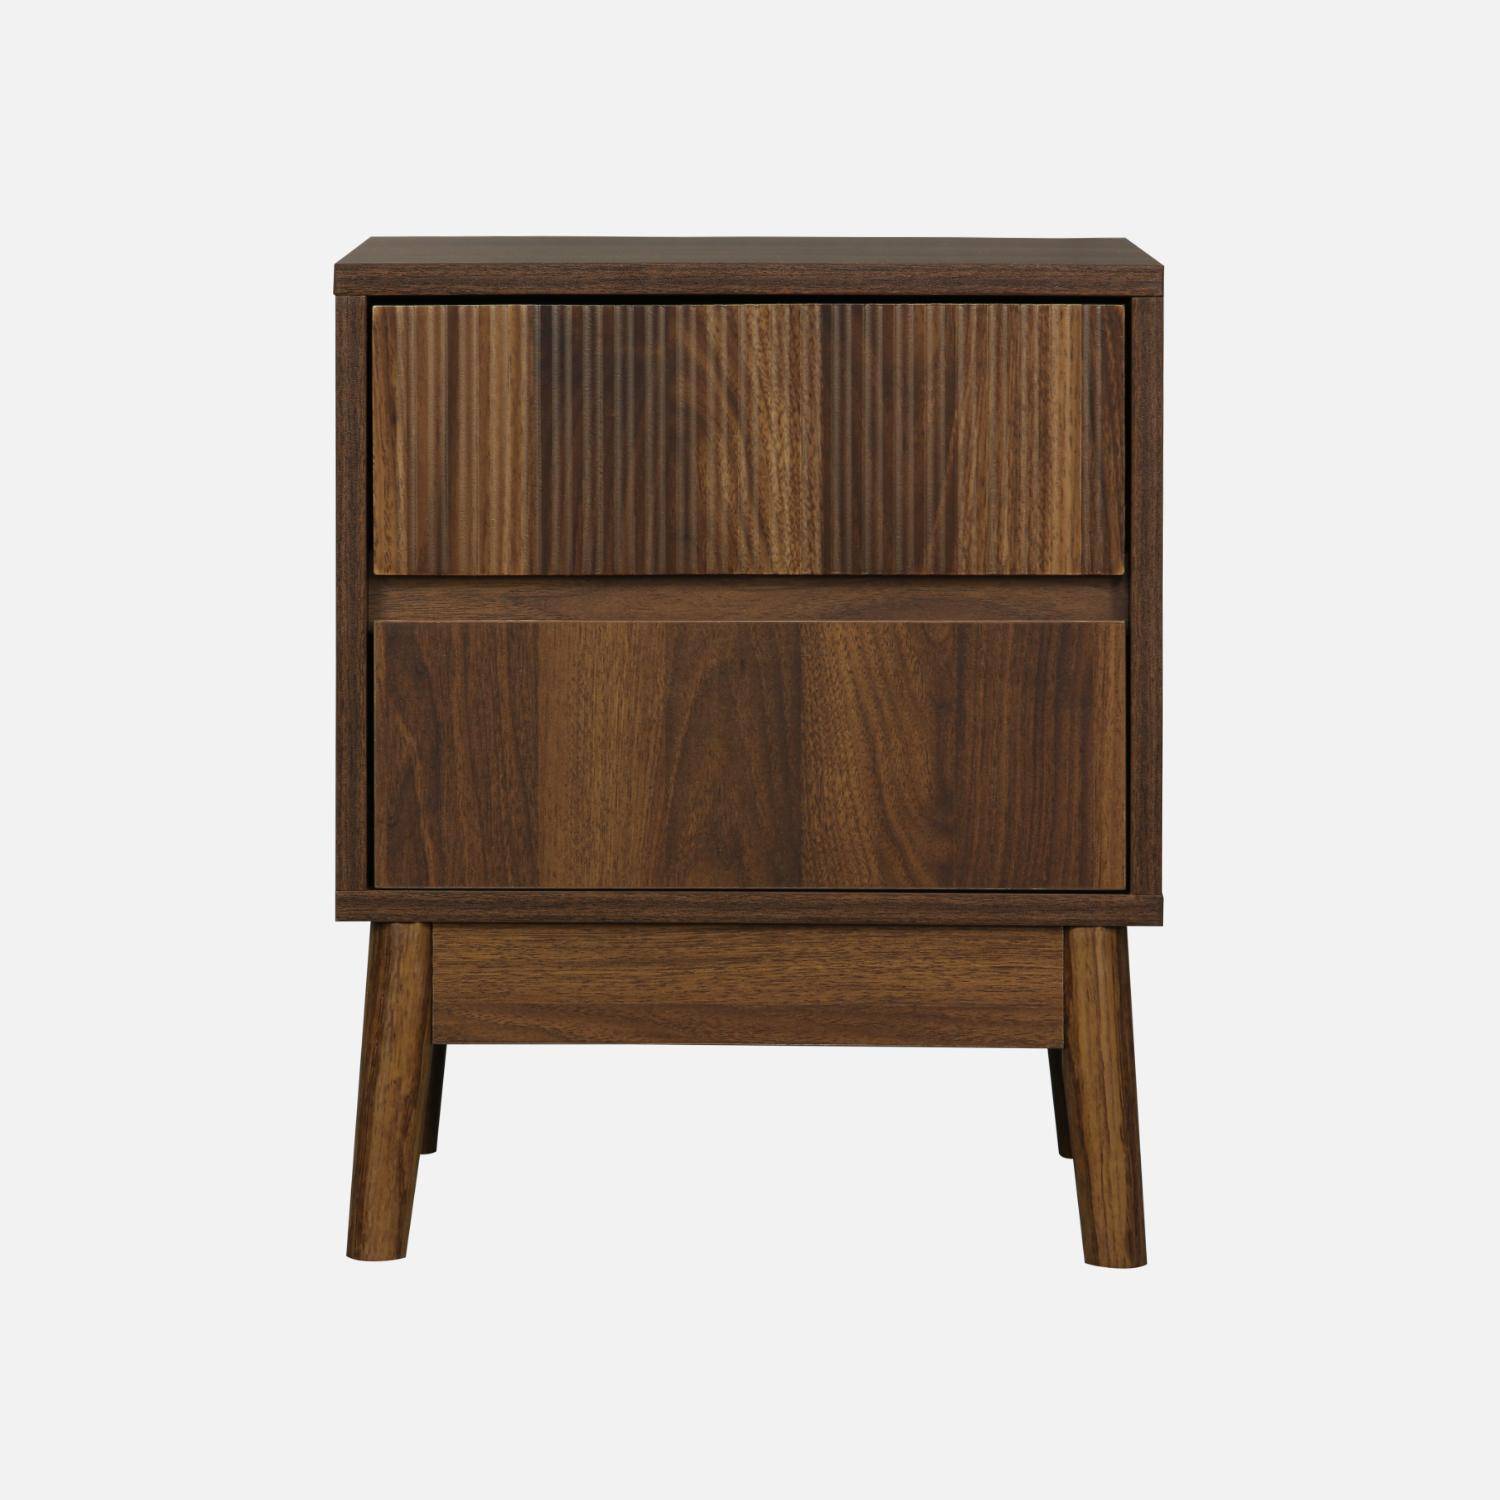 Two-drawer bedside table, walnut decor and pine base - Linear,sweeek,Photo4